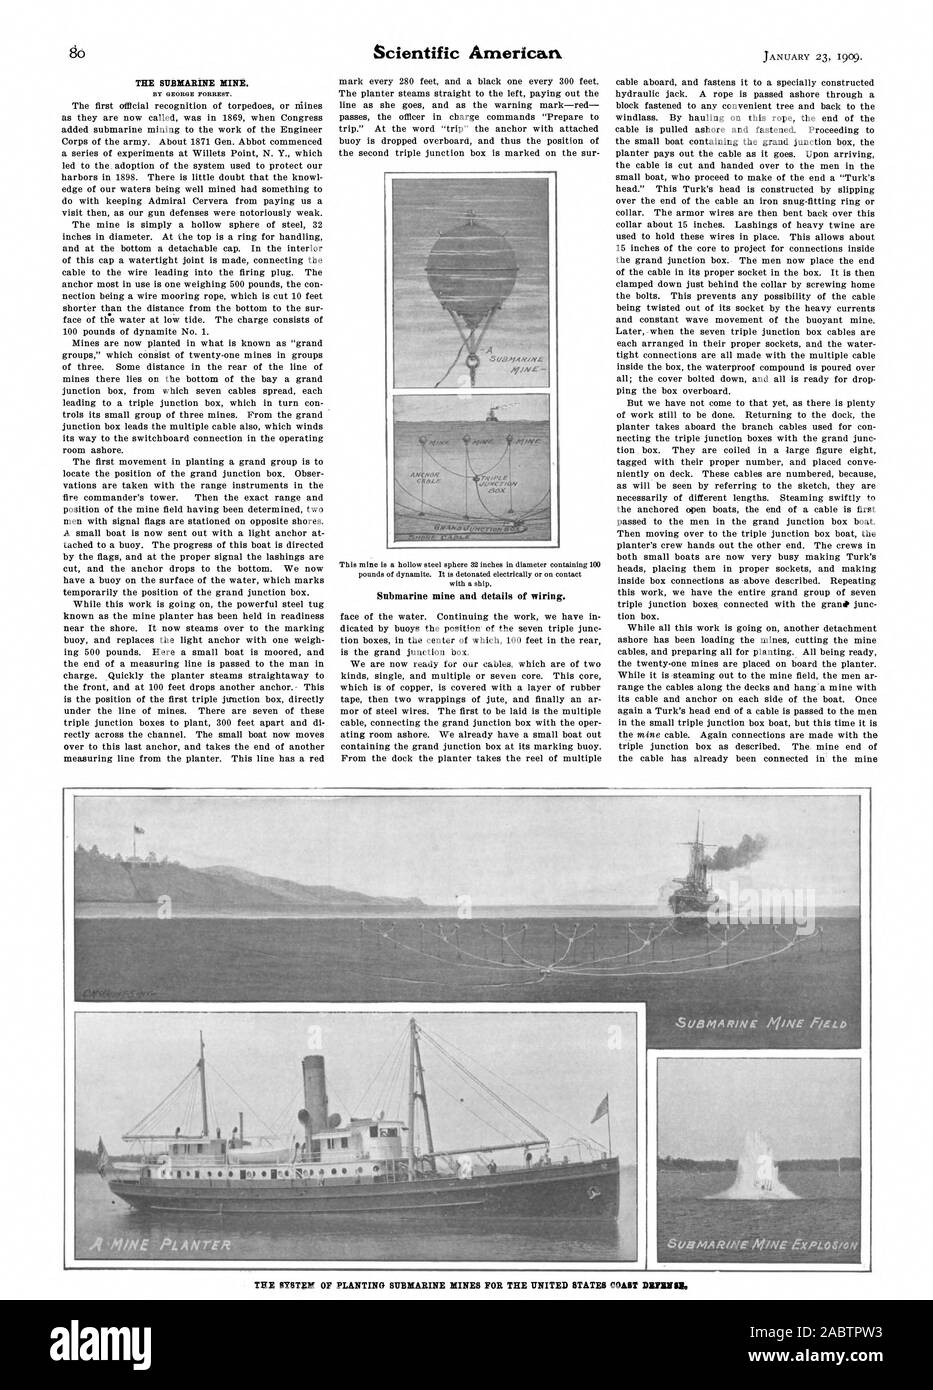 THE SUBMARINE MINE. Scientific American - '.7. AN male Submarine mine and details of wiring., -1909-01-23 Stock Photo